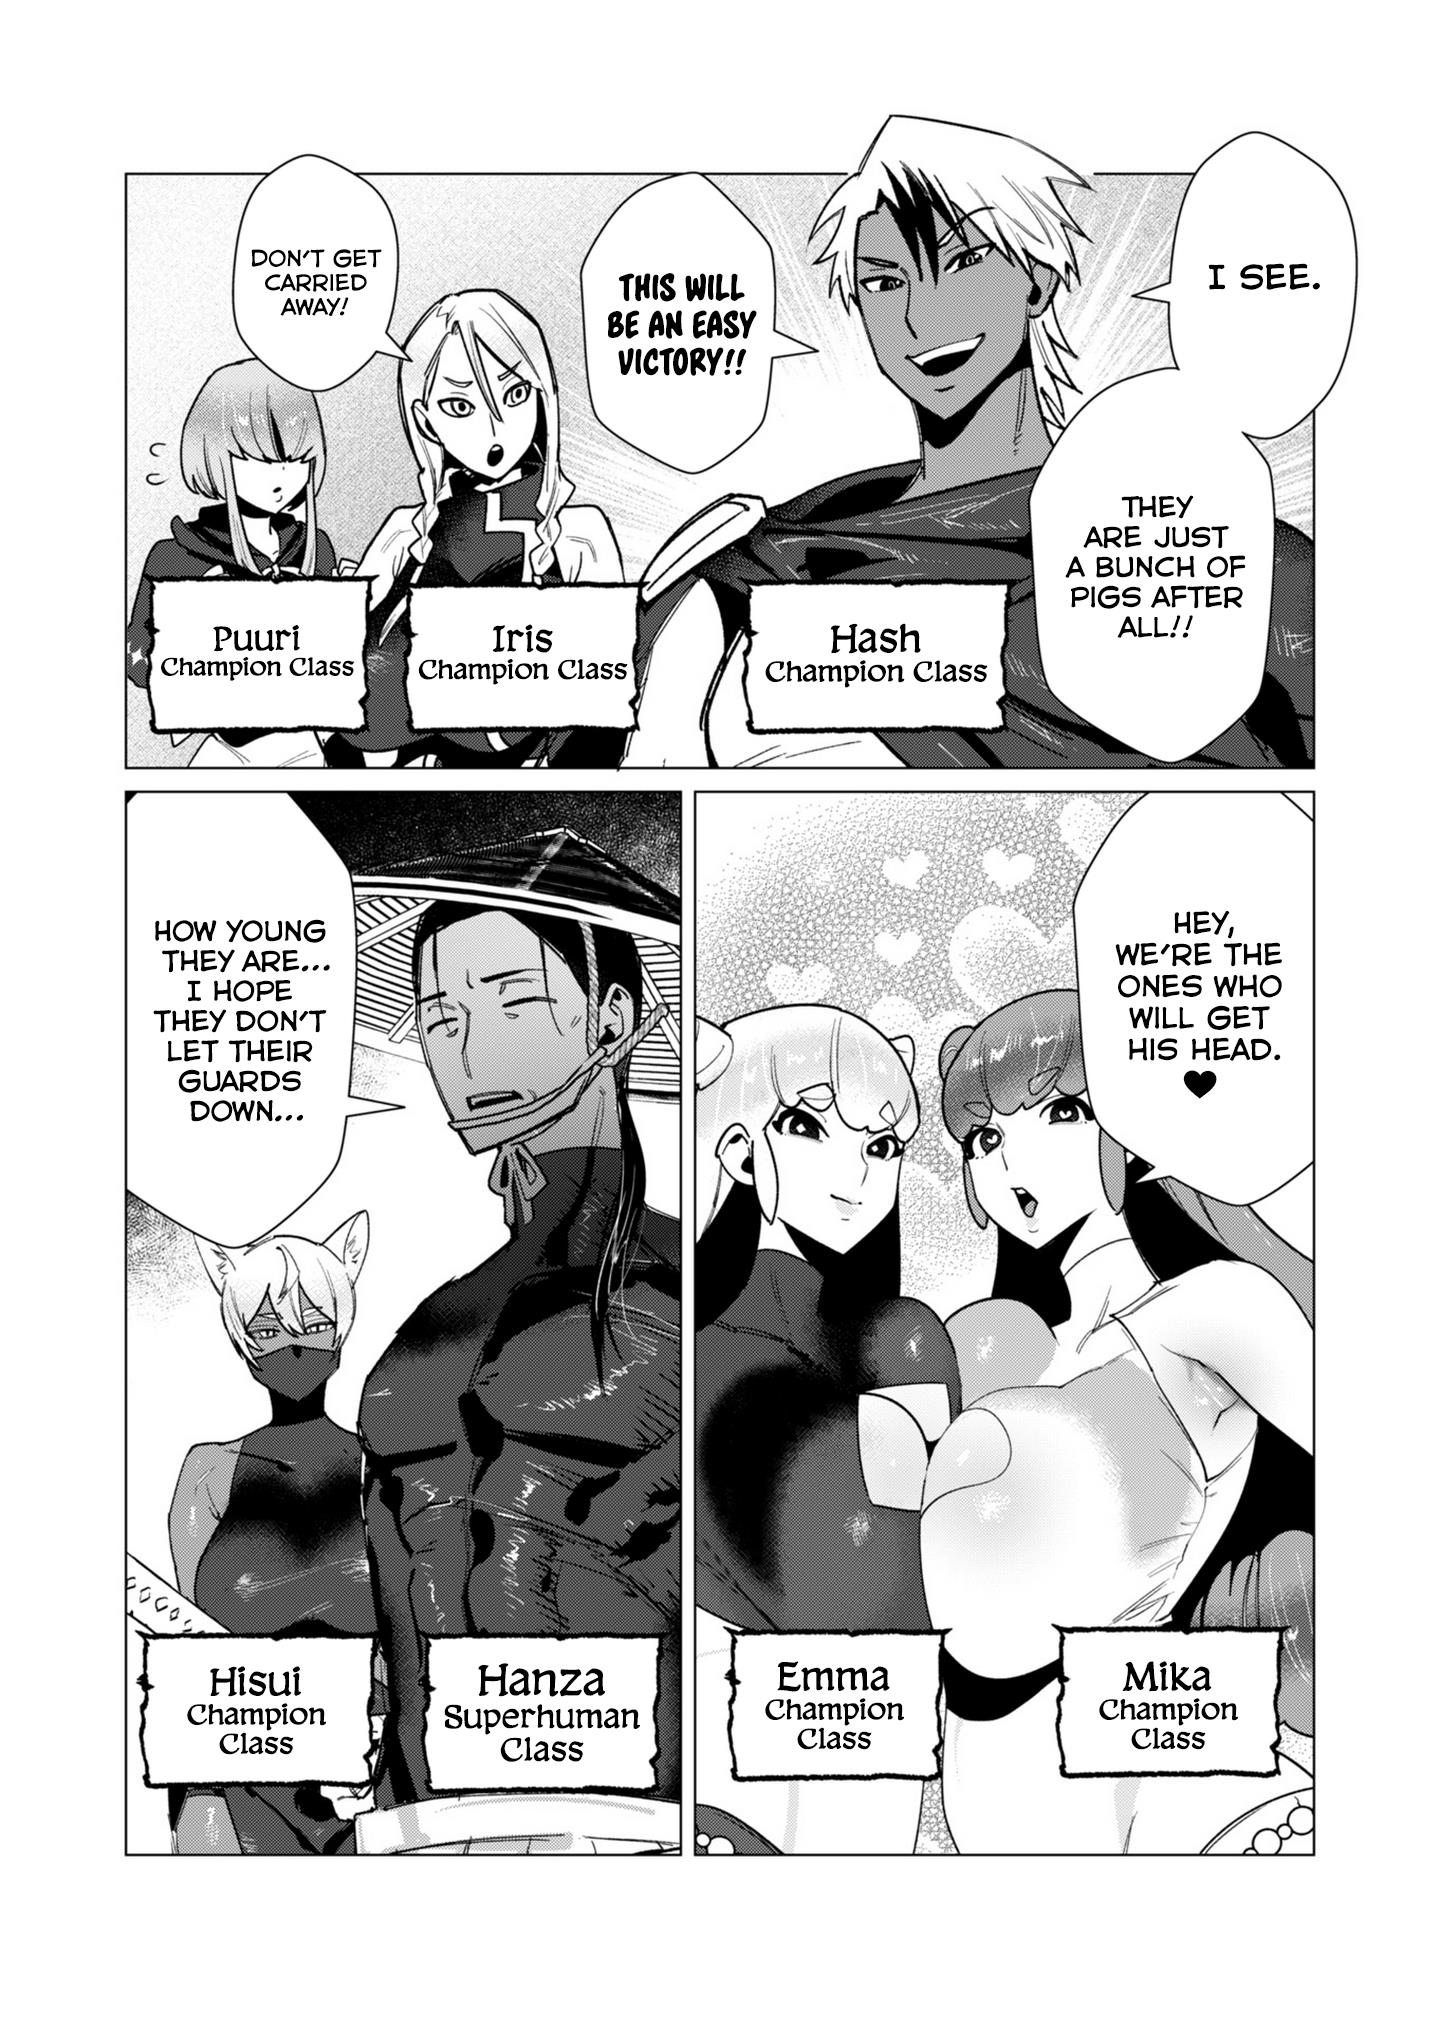 The Hero Wants A Married Woman As A Reward - Page 4